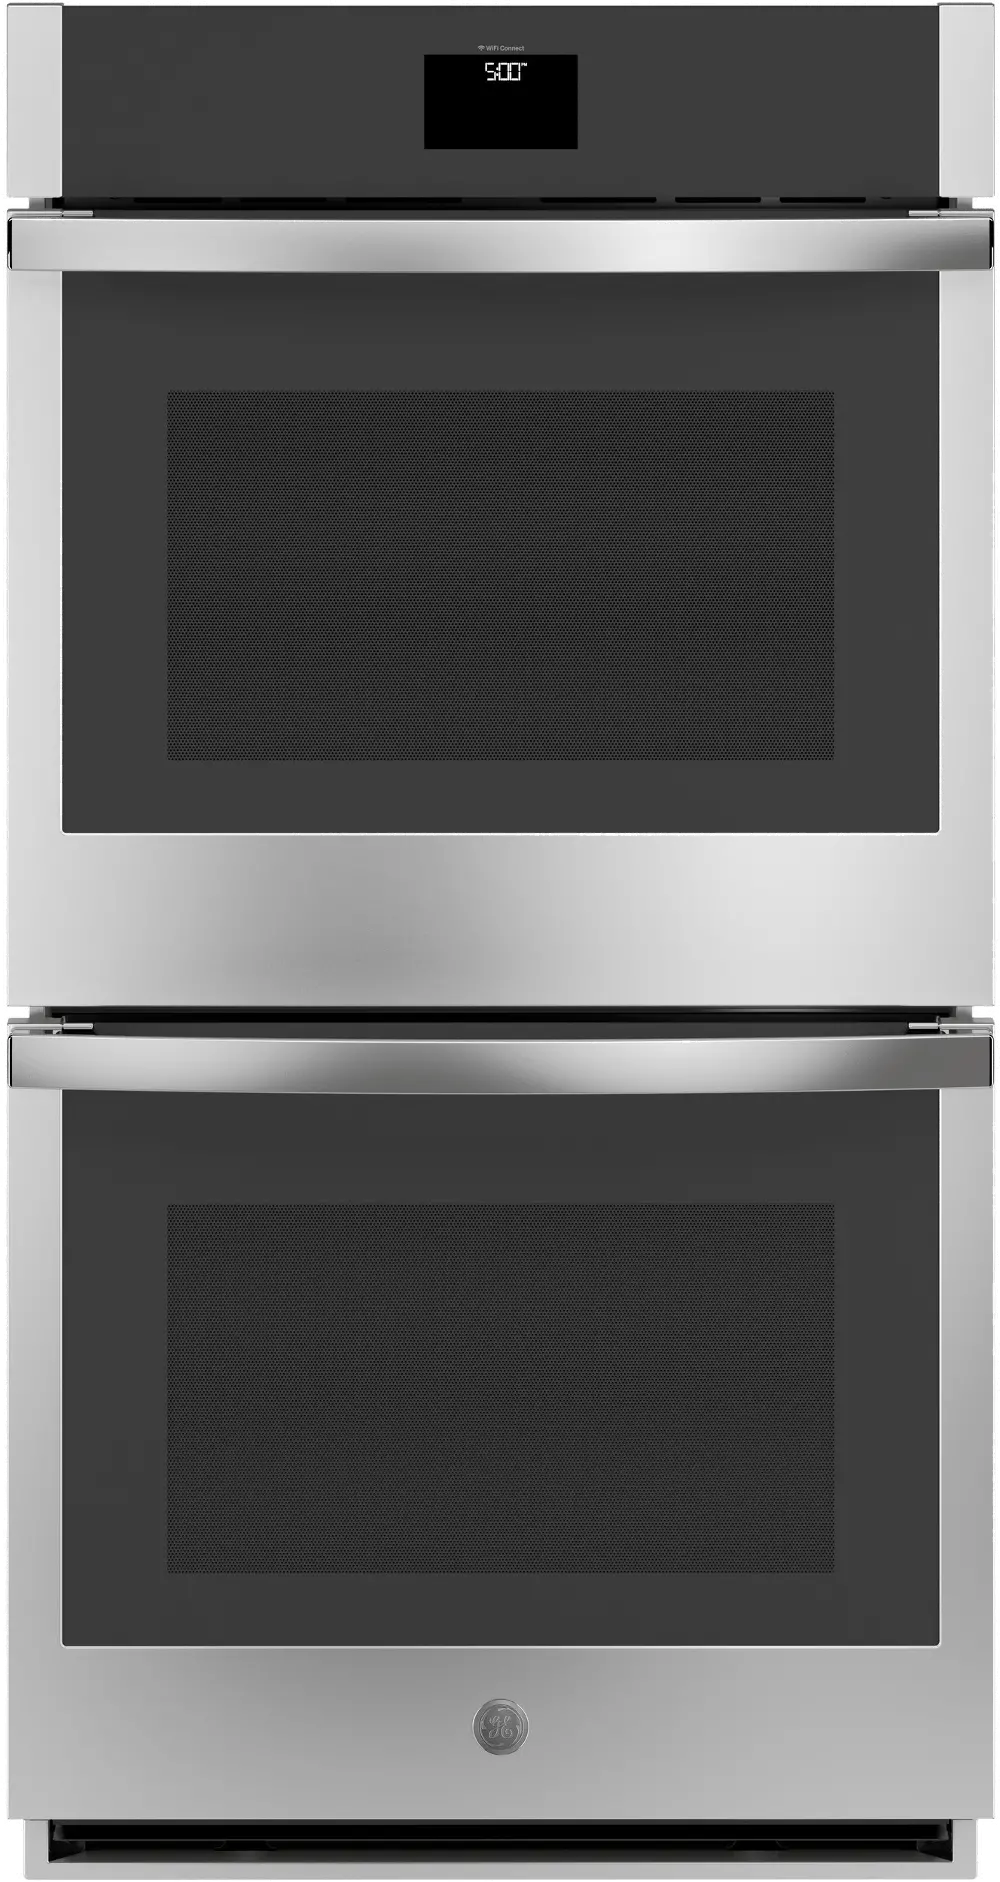 JKD5000SNSS GE 8.6 cu ft Double Wall Oven - Stainless Steel 27 Inch-1